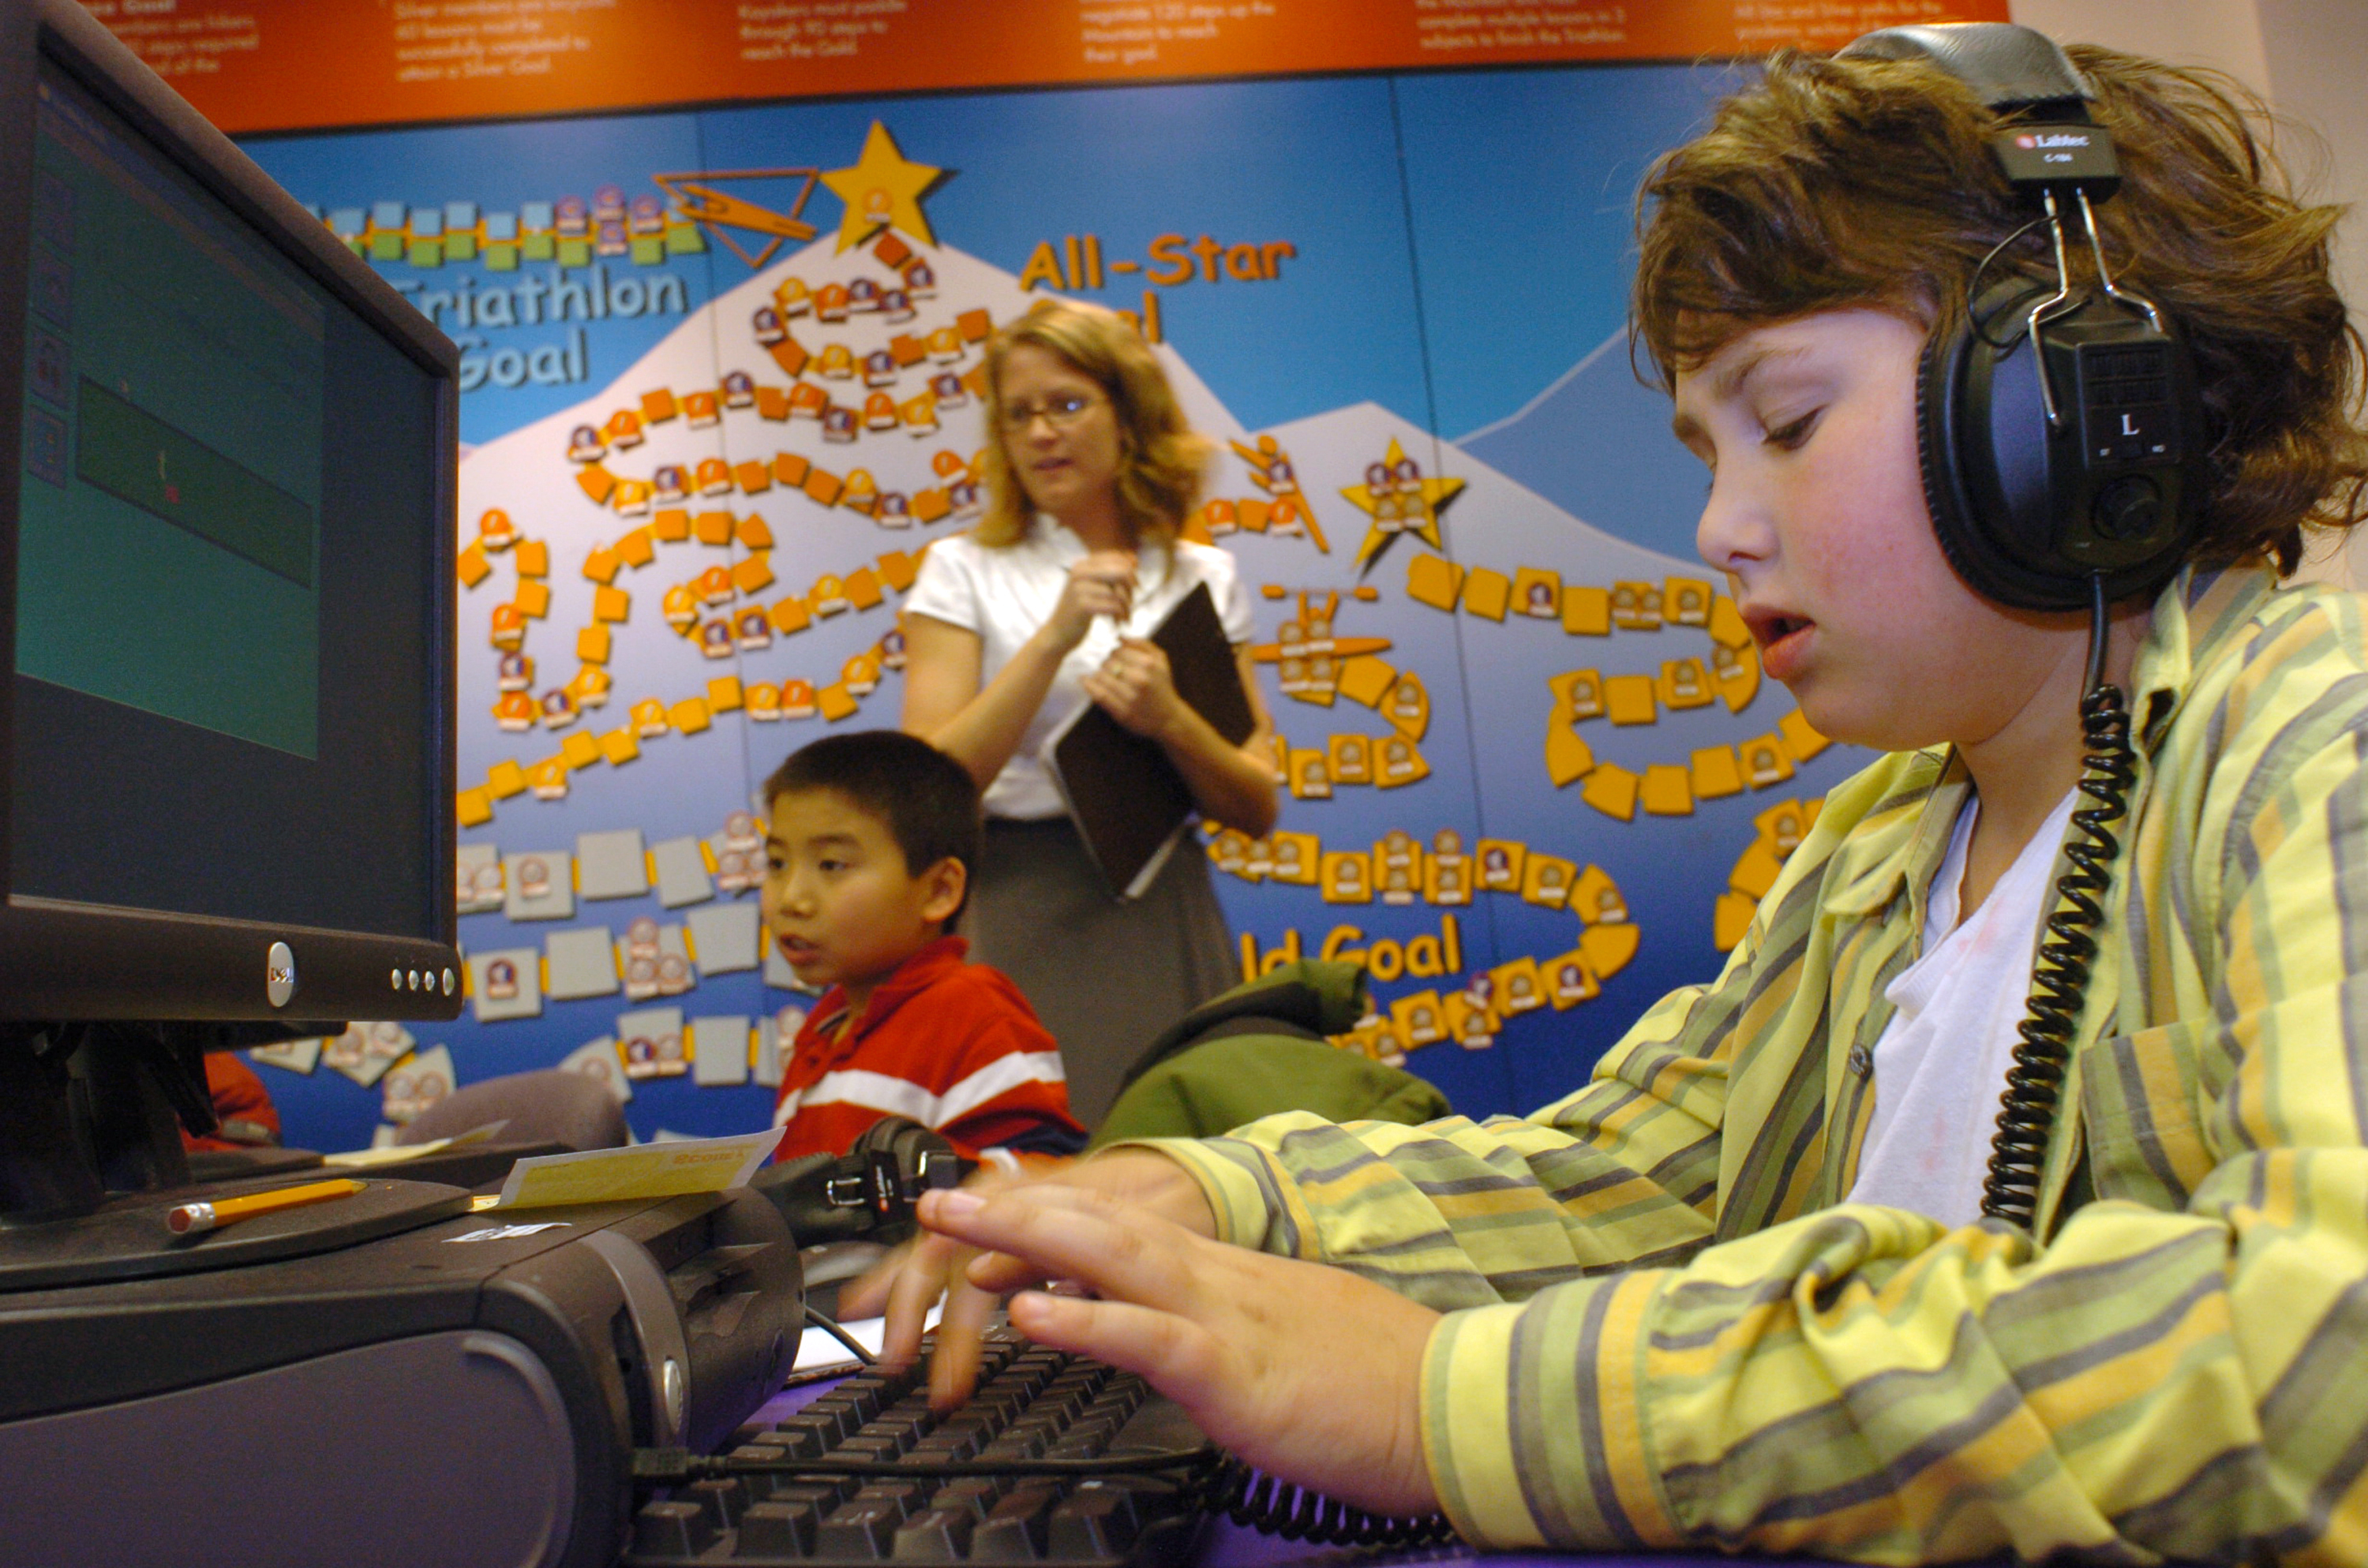 Fifth grader working at the computer during his after-school learning